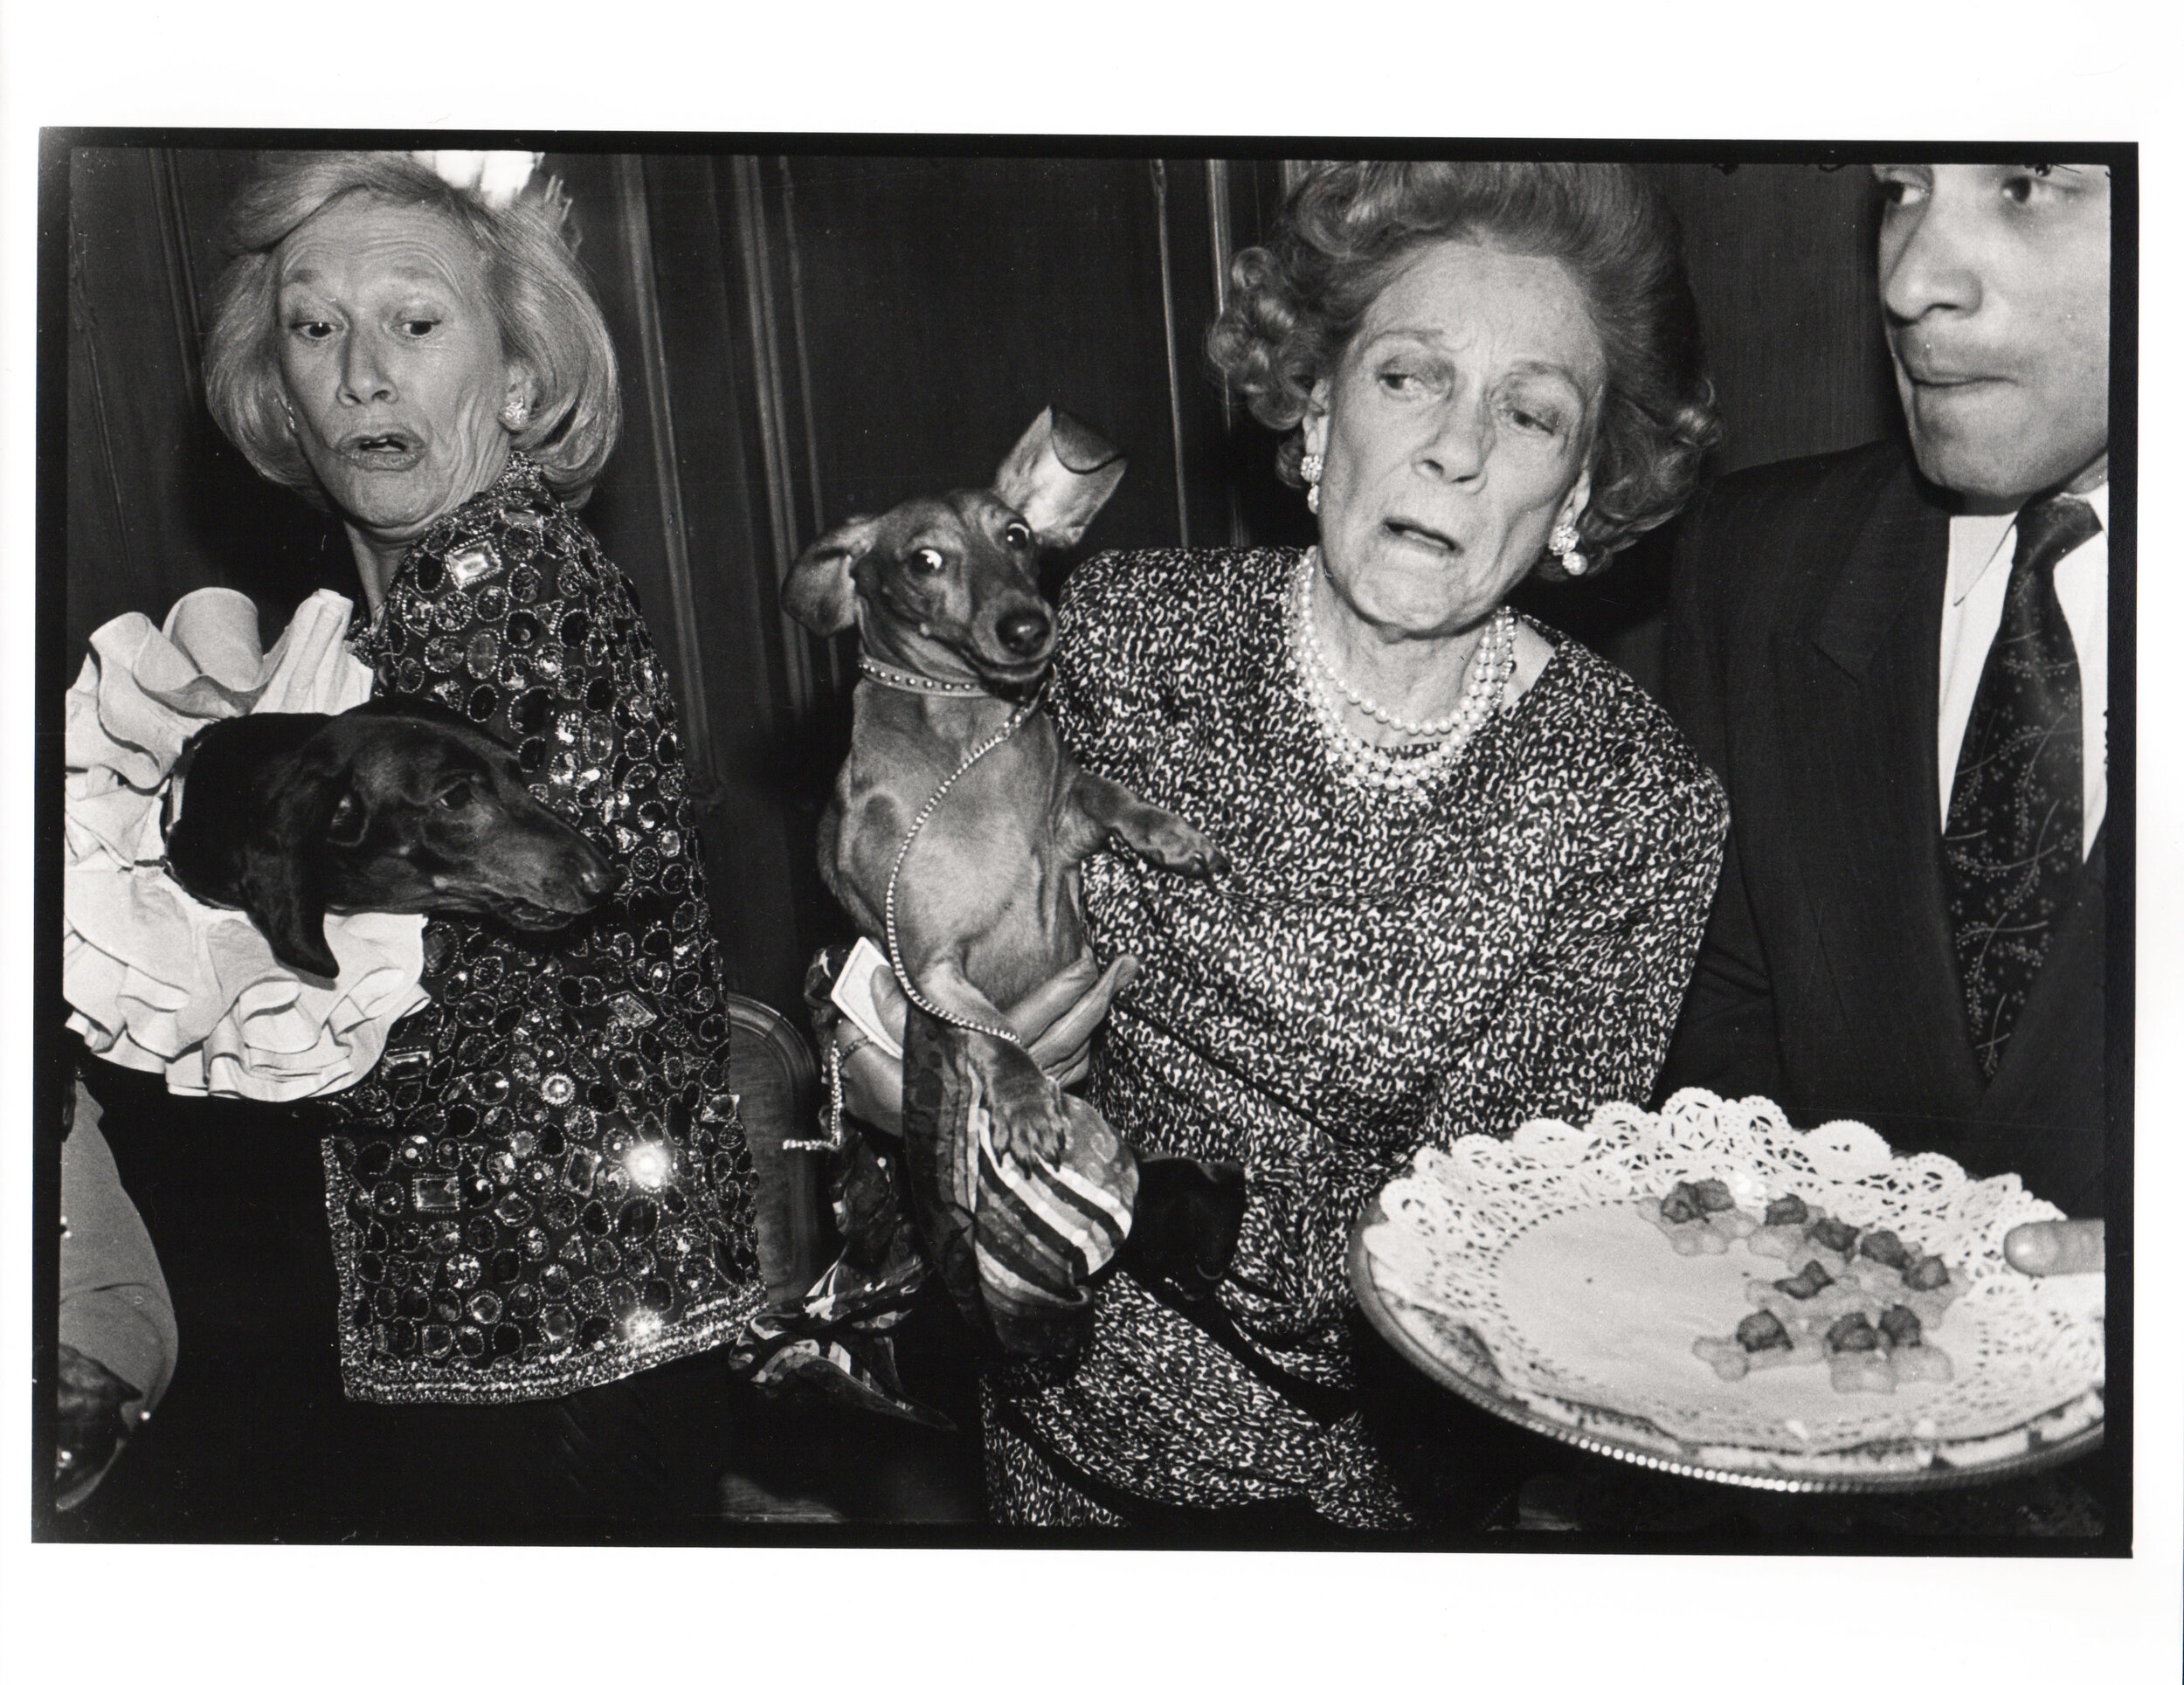 Dachshunds fighting over canapes, ris Love and Brooke Astor with Just Desserts and Dolly Astor at a Dachund party. Barbetta. Manhattan.jpg